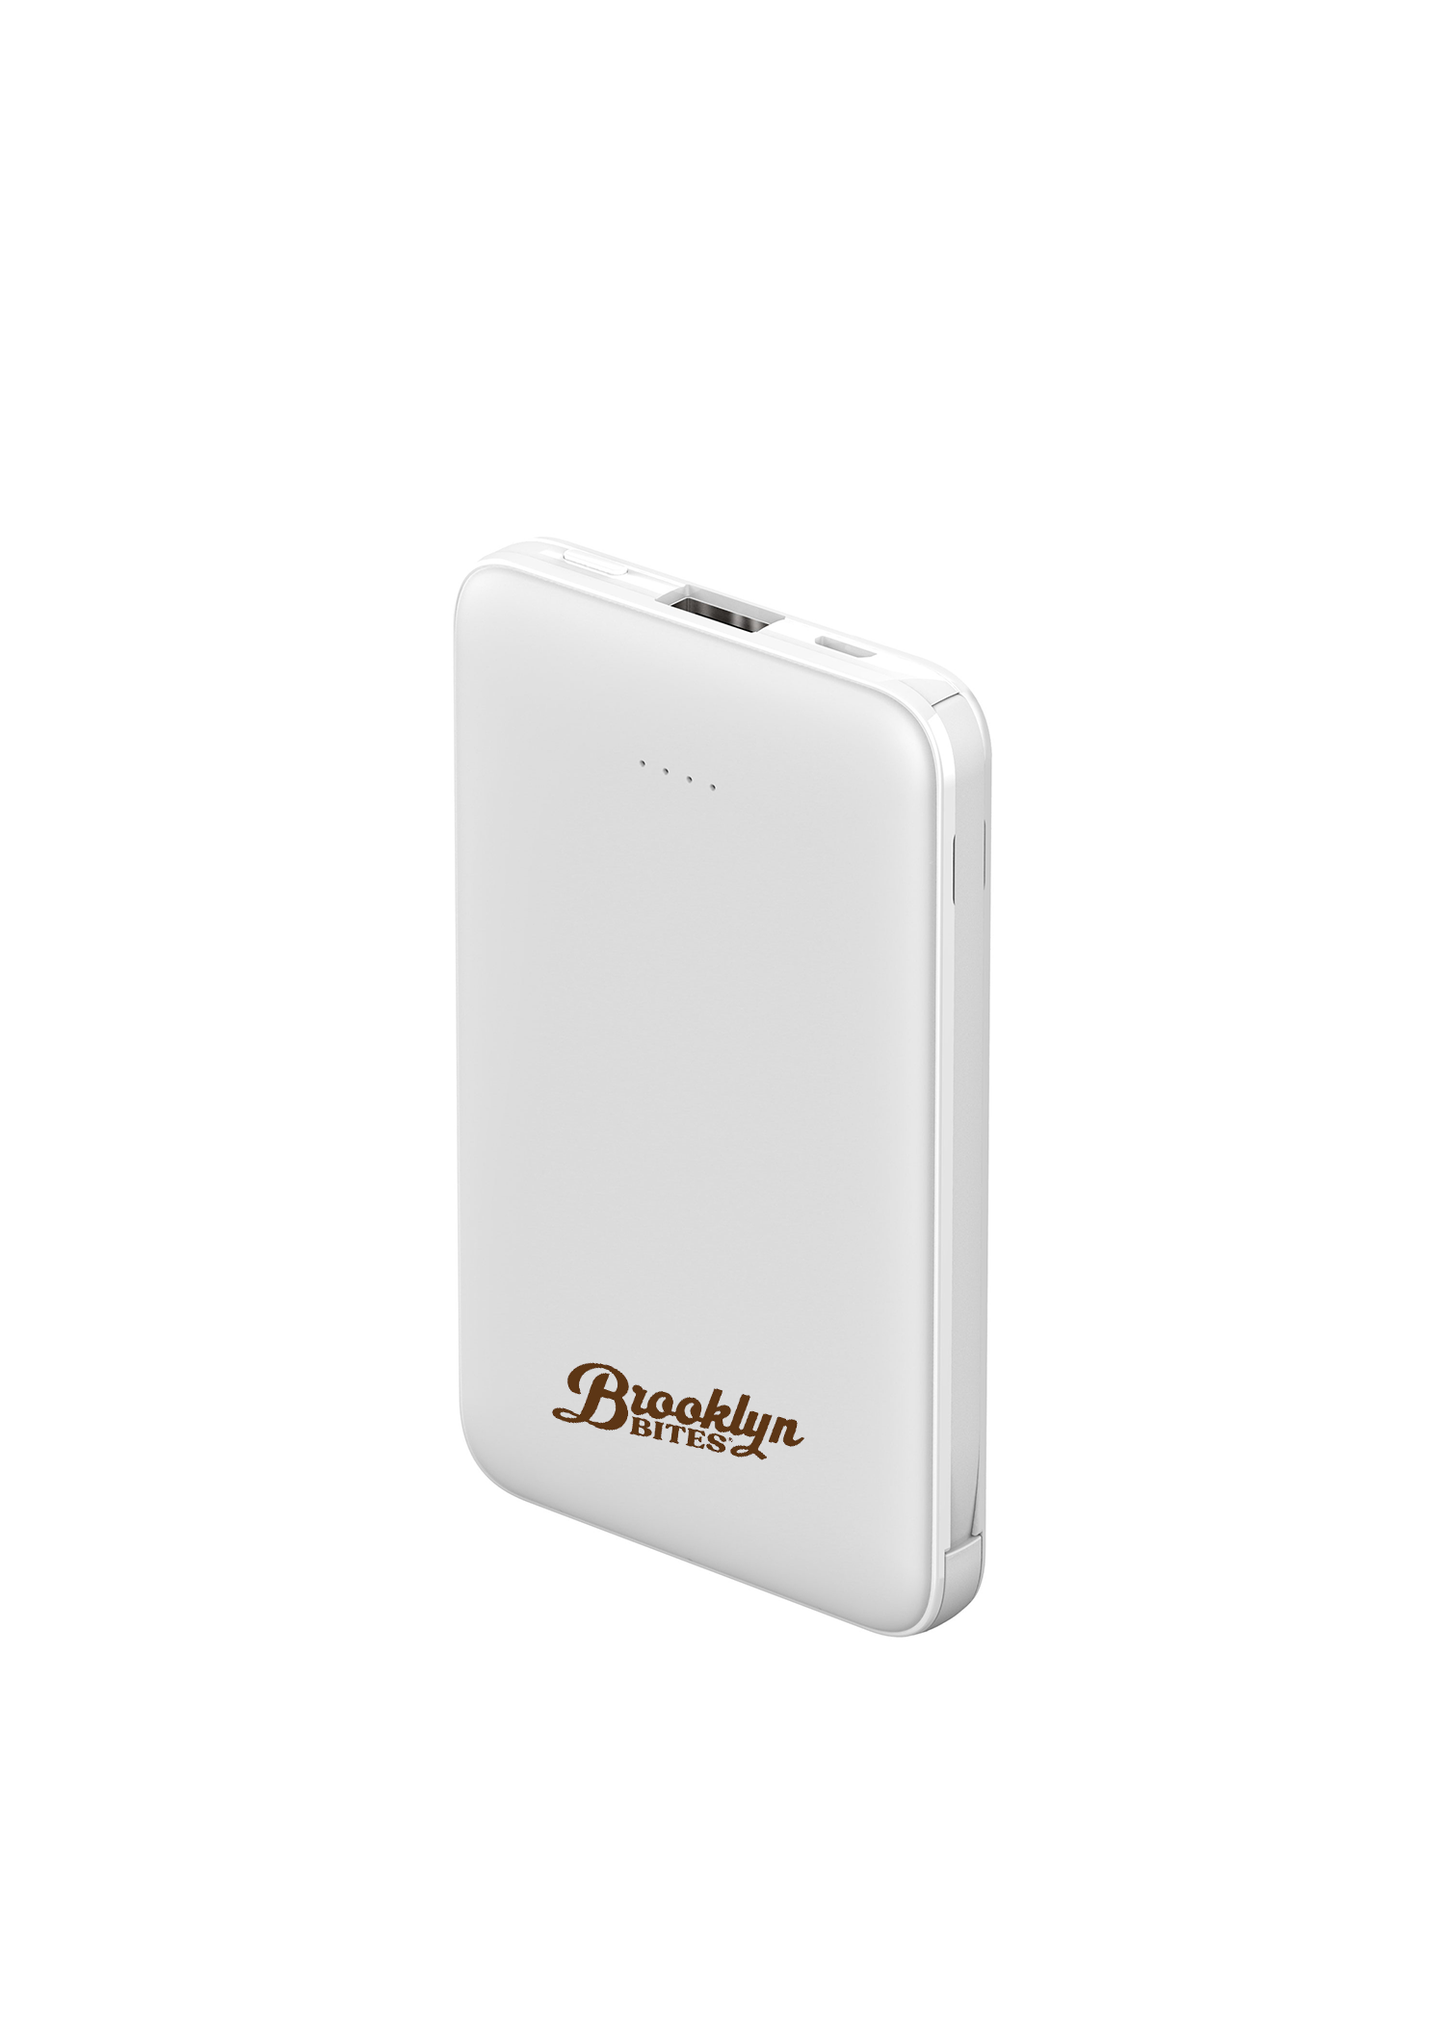 Brooklyn Bites Portable Charger